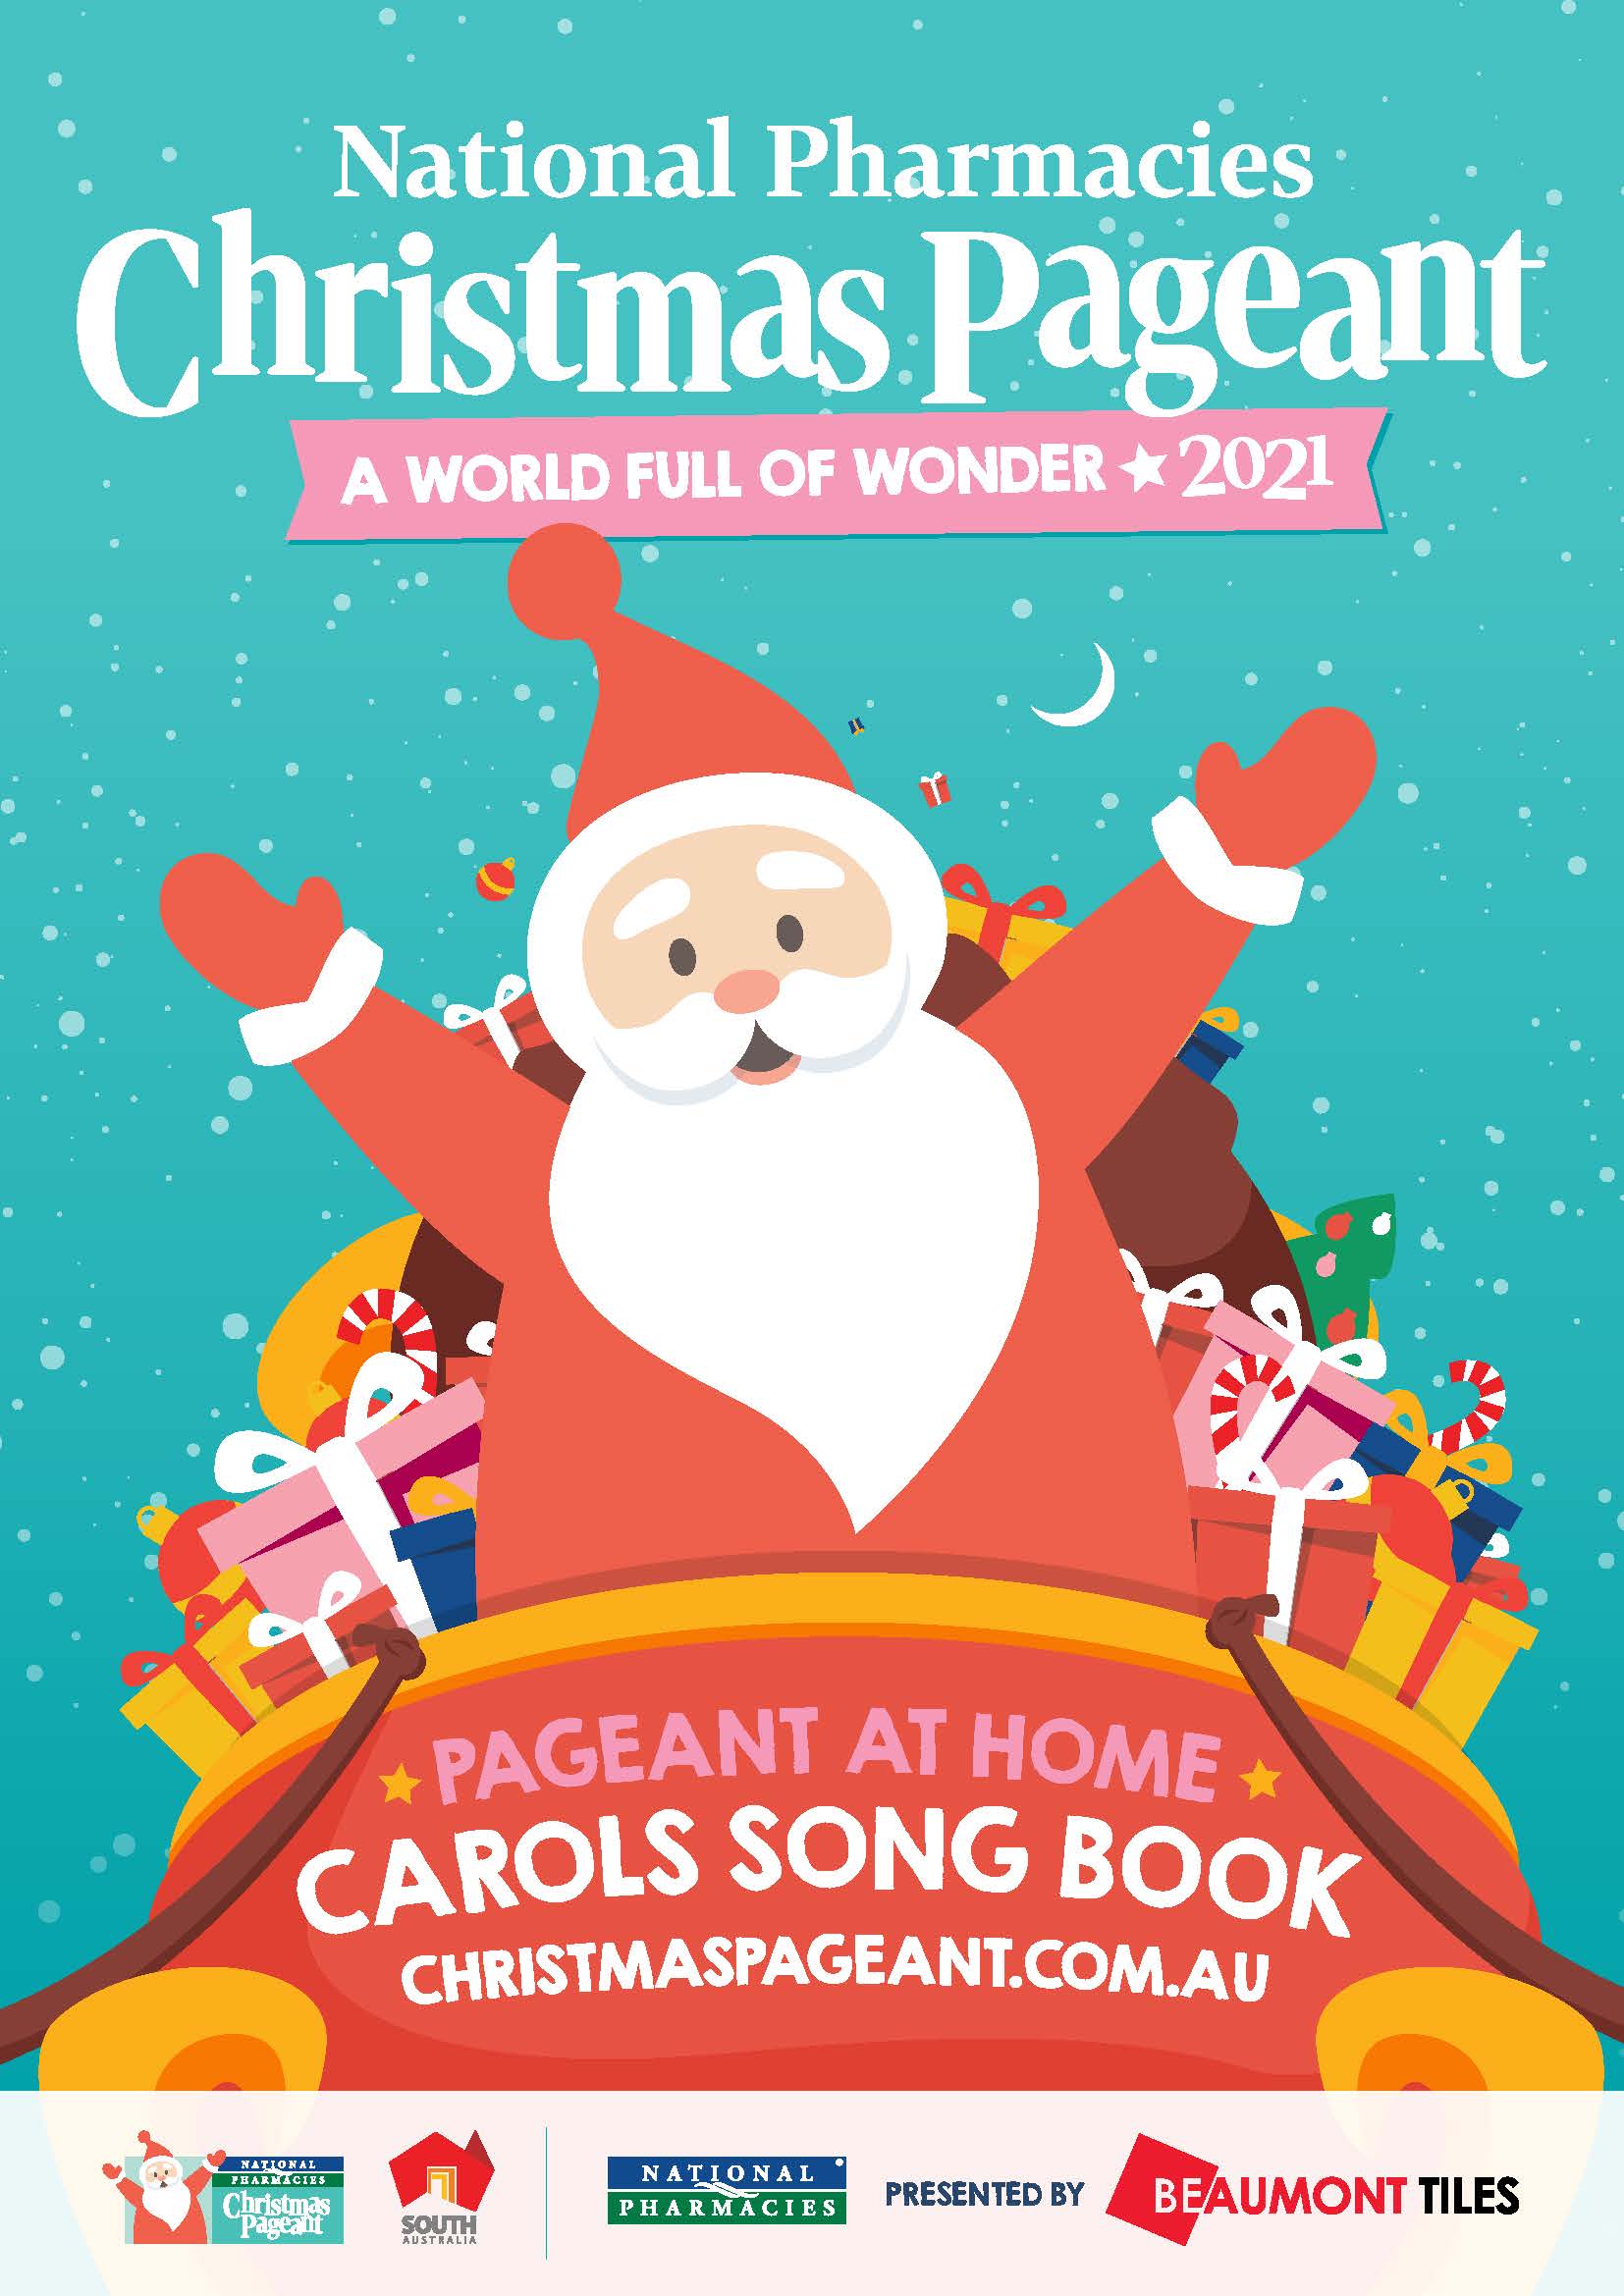 Carols songbook presented by Beaumont Tiles